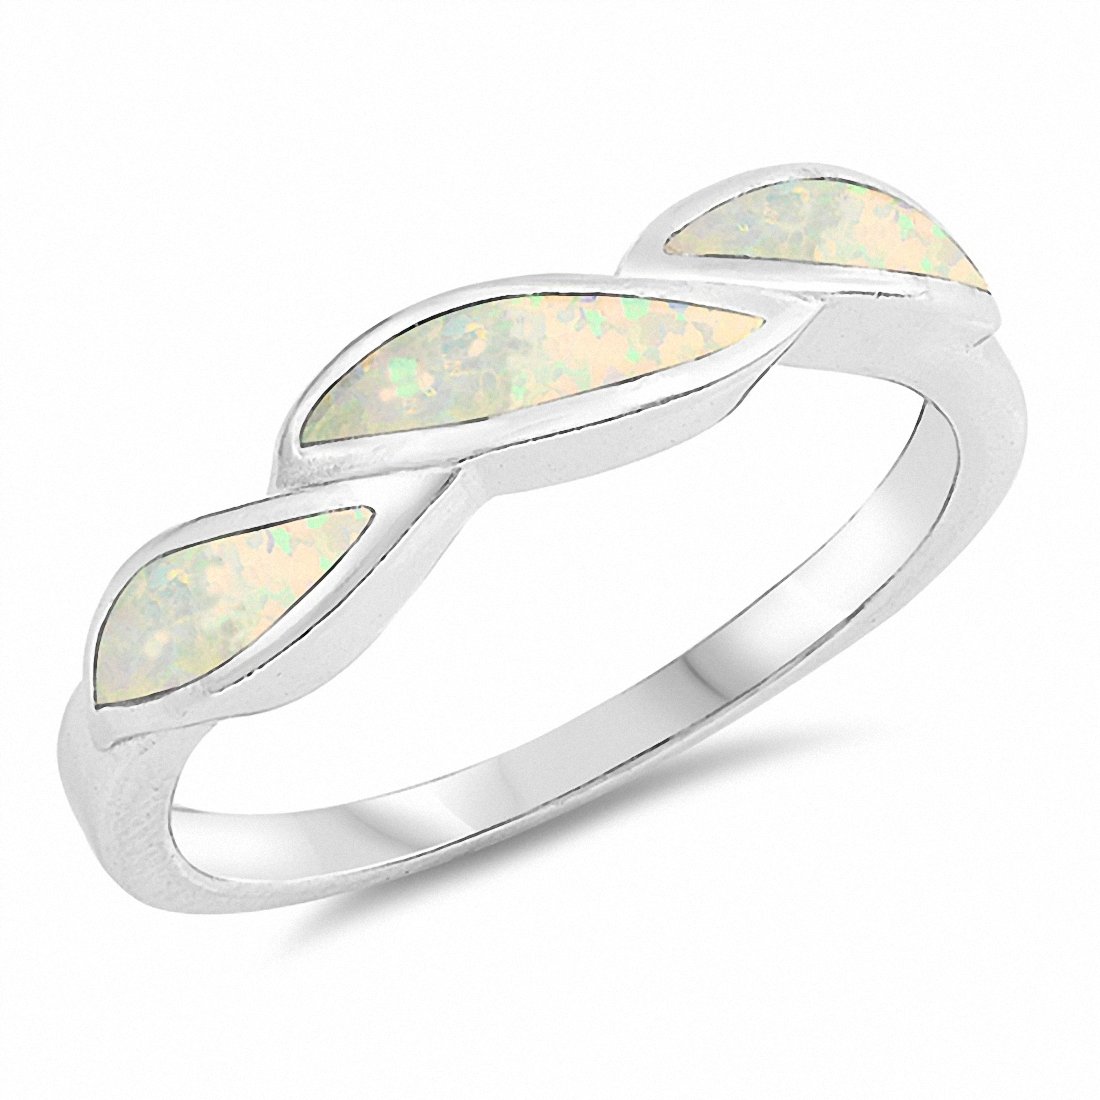 Fashion Band Silver Ring Lab Created Opal 925 Sterling Silver